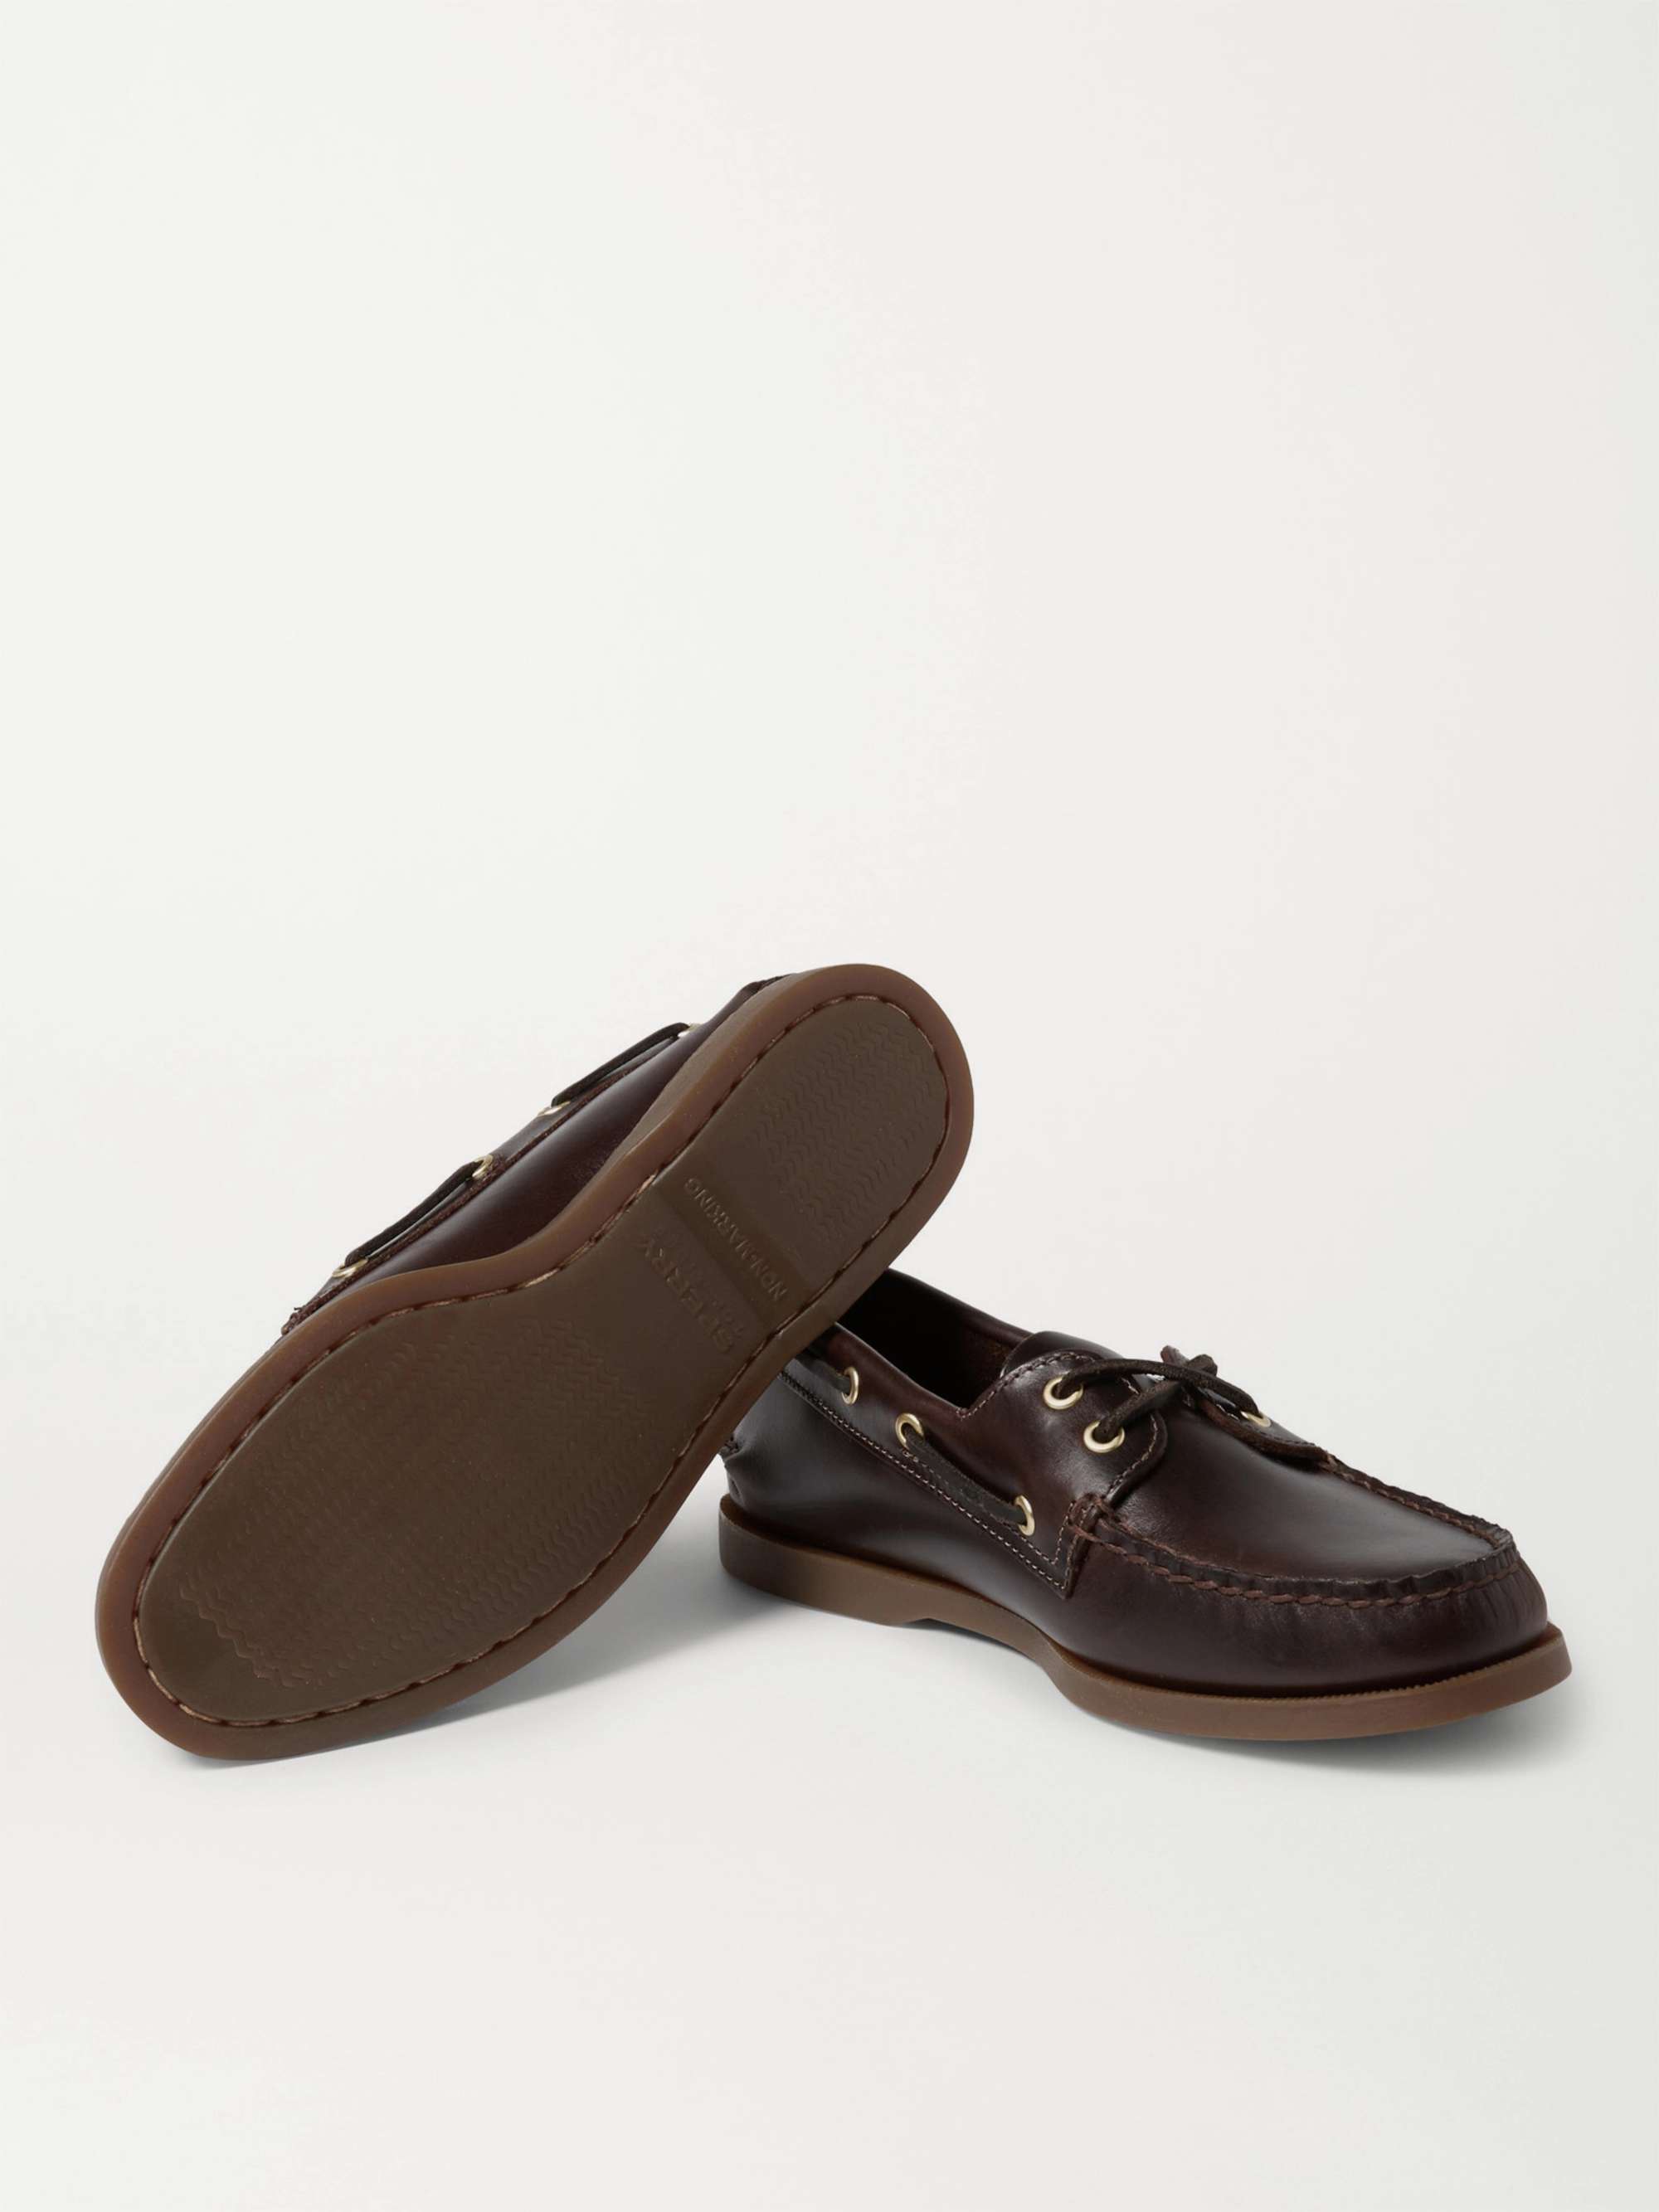 SPERRY Authentic Original Burnished-Leather Boat Shoes | MR PORTER